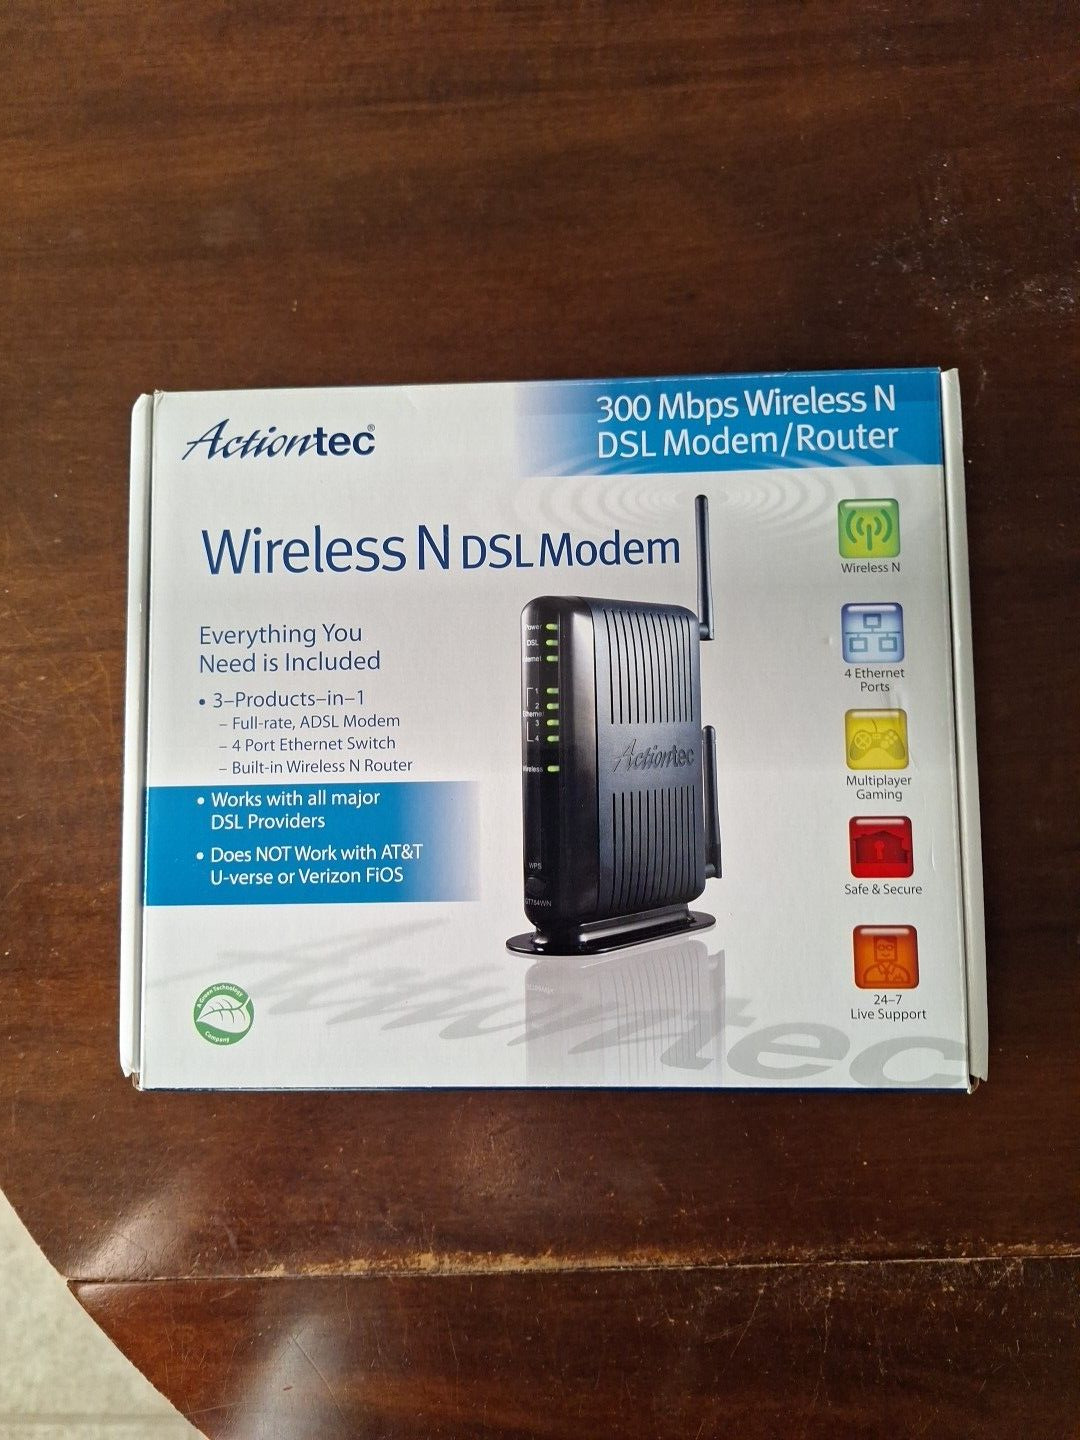 Actiontec GT784WN-01 300 Mbps 4-Port Wireless N Router